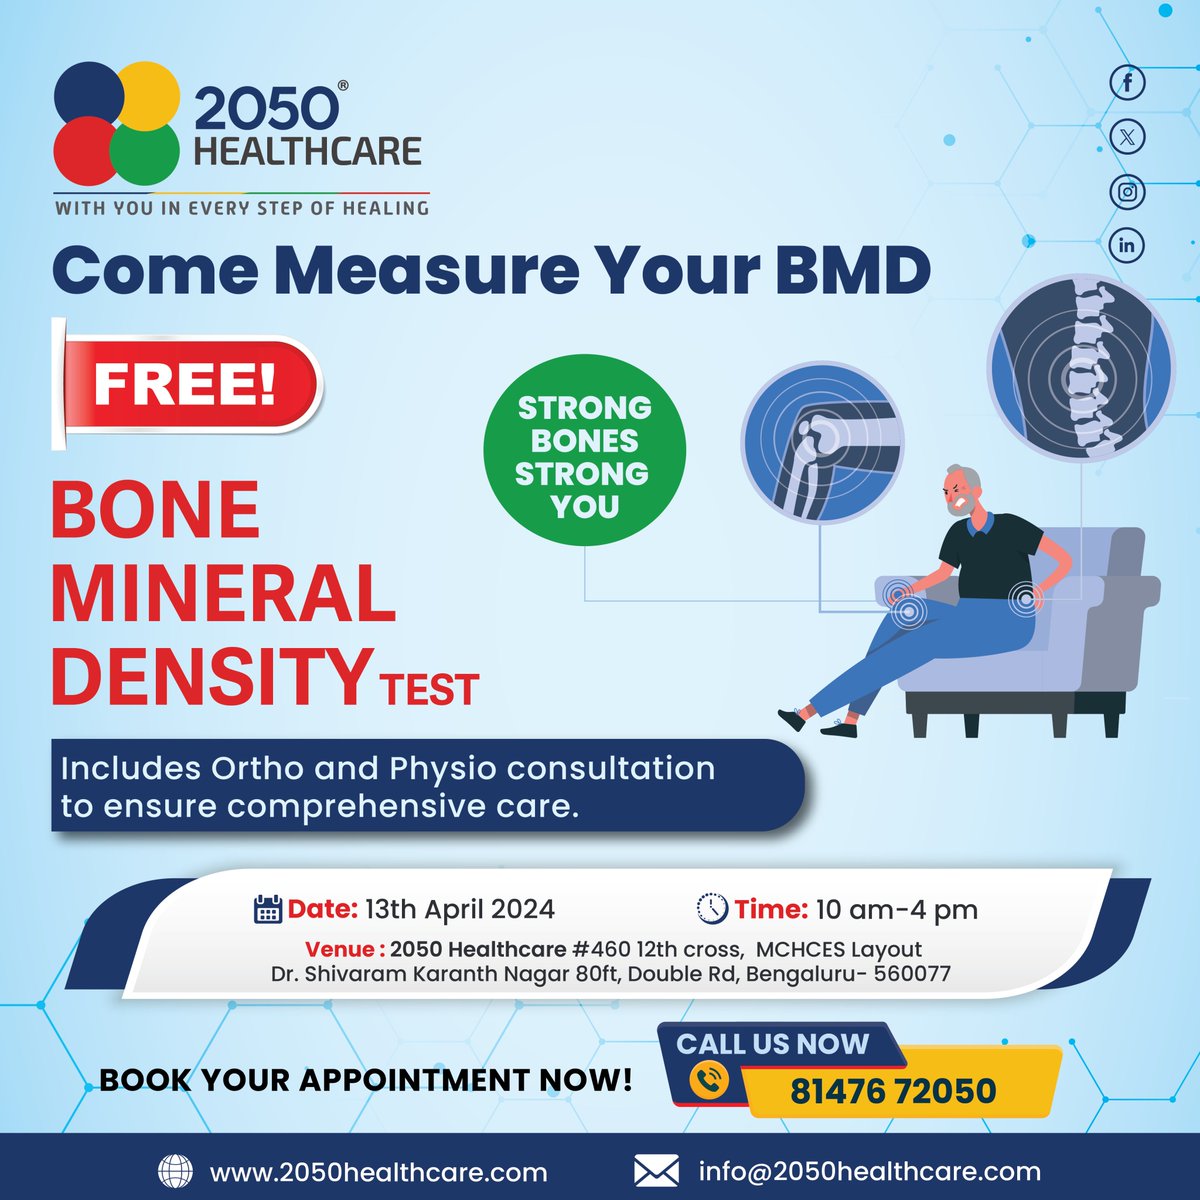 Join us on 13th April for a FREE Bone Mineral Density Test, including comprehensive ortho and physio consultation.

Book your appointment now!

#BoneHealth #OsteoporosisAwareness #OsteoporosisPrevention #HealthScreening #2050Healthcare